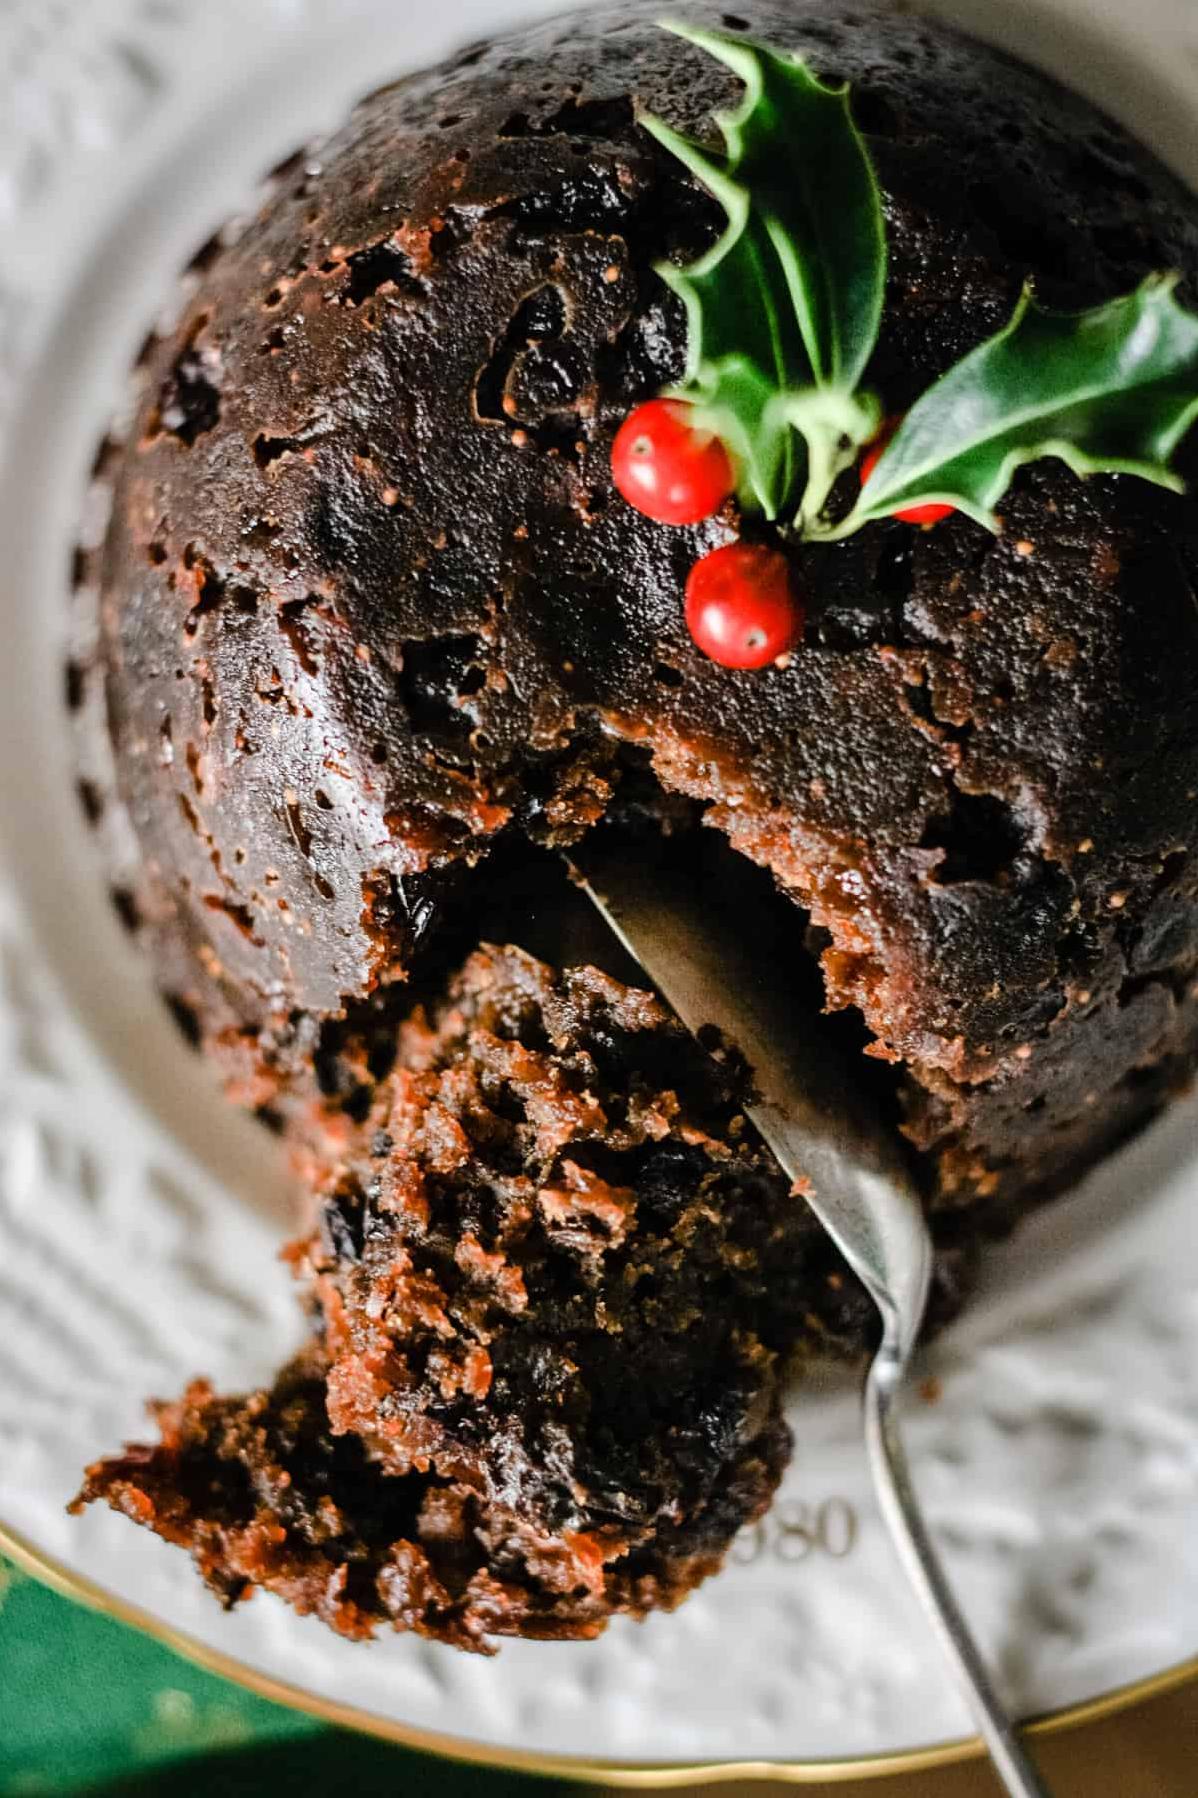  Rich and decadent Christmas pudding